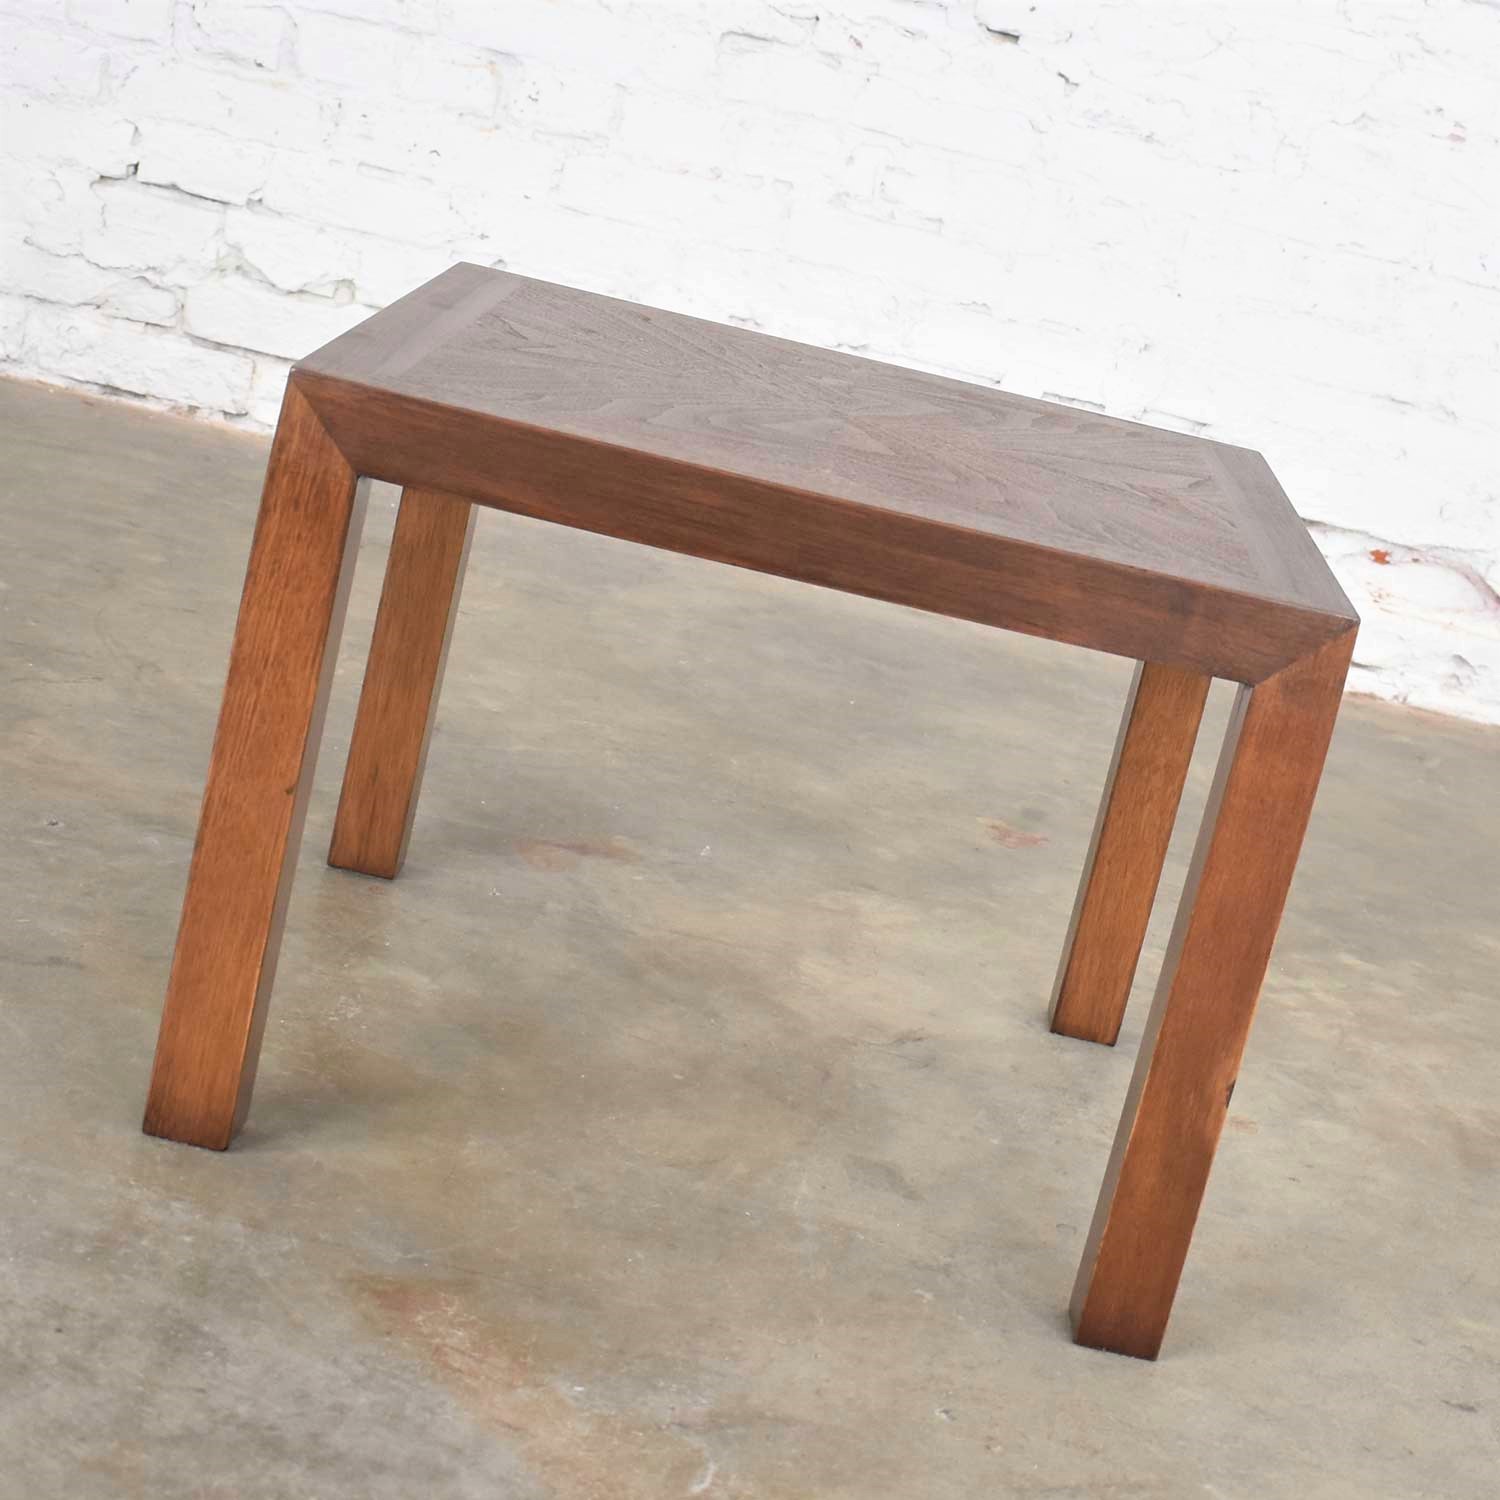 Vintage Modern Lane Solid Walnut Square Parsons Side Table w/ Inlay Style #1124-18 1970